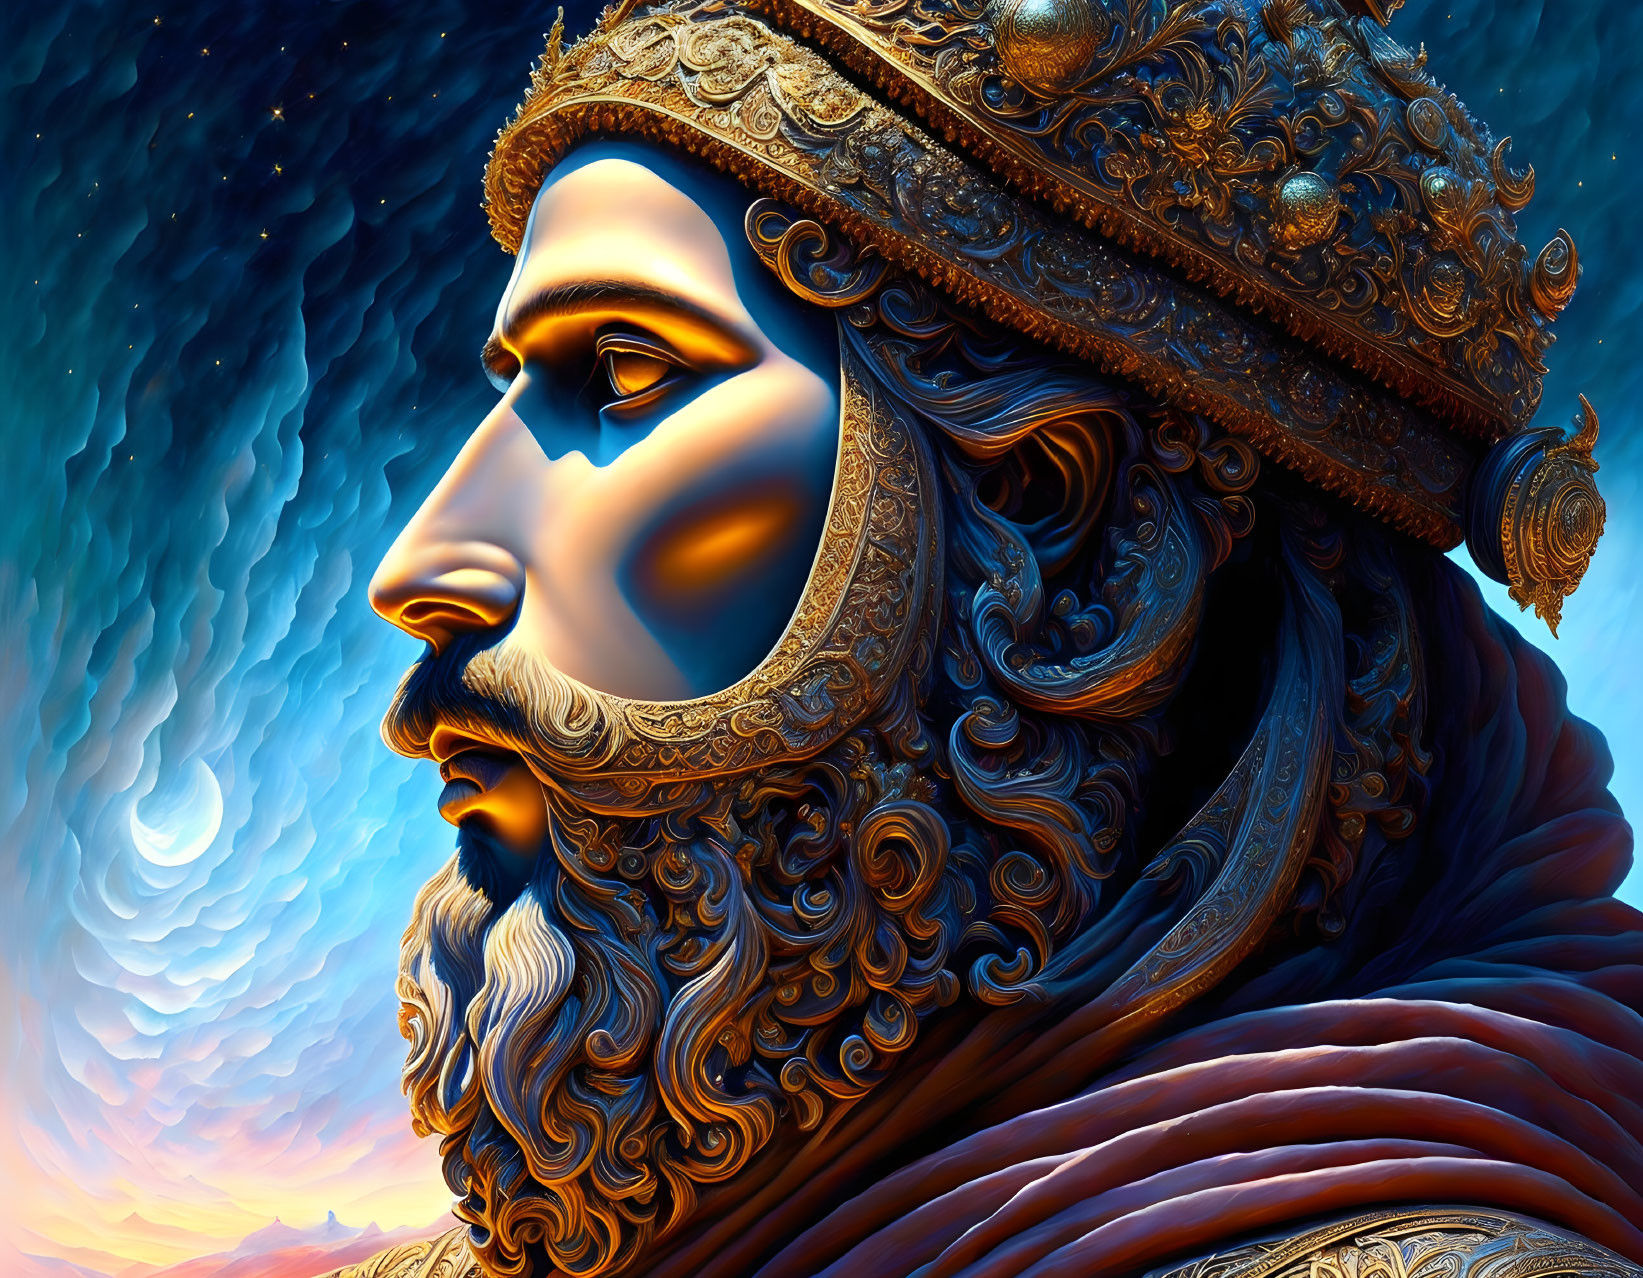 Regal figure in golden crown and armor against starry sky and sunset